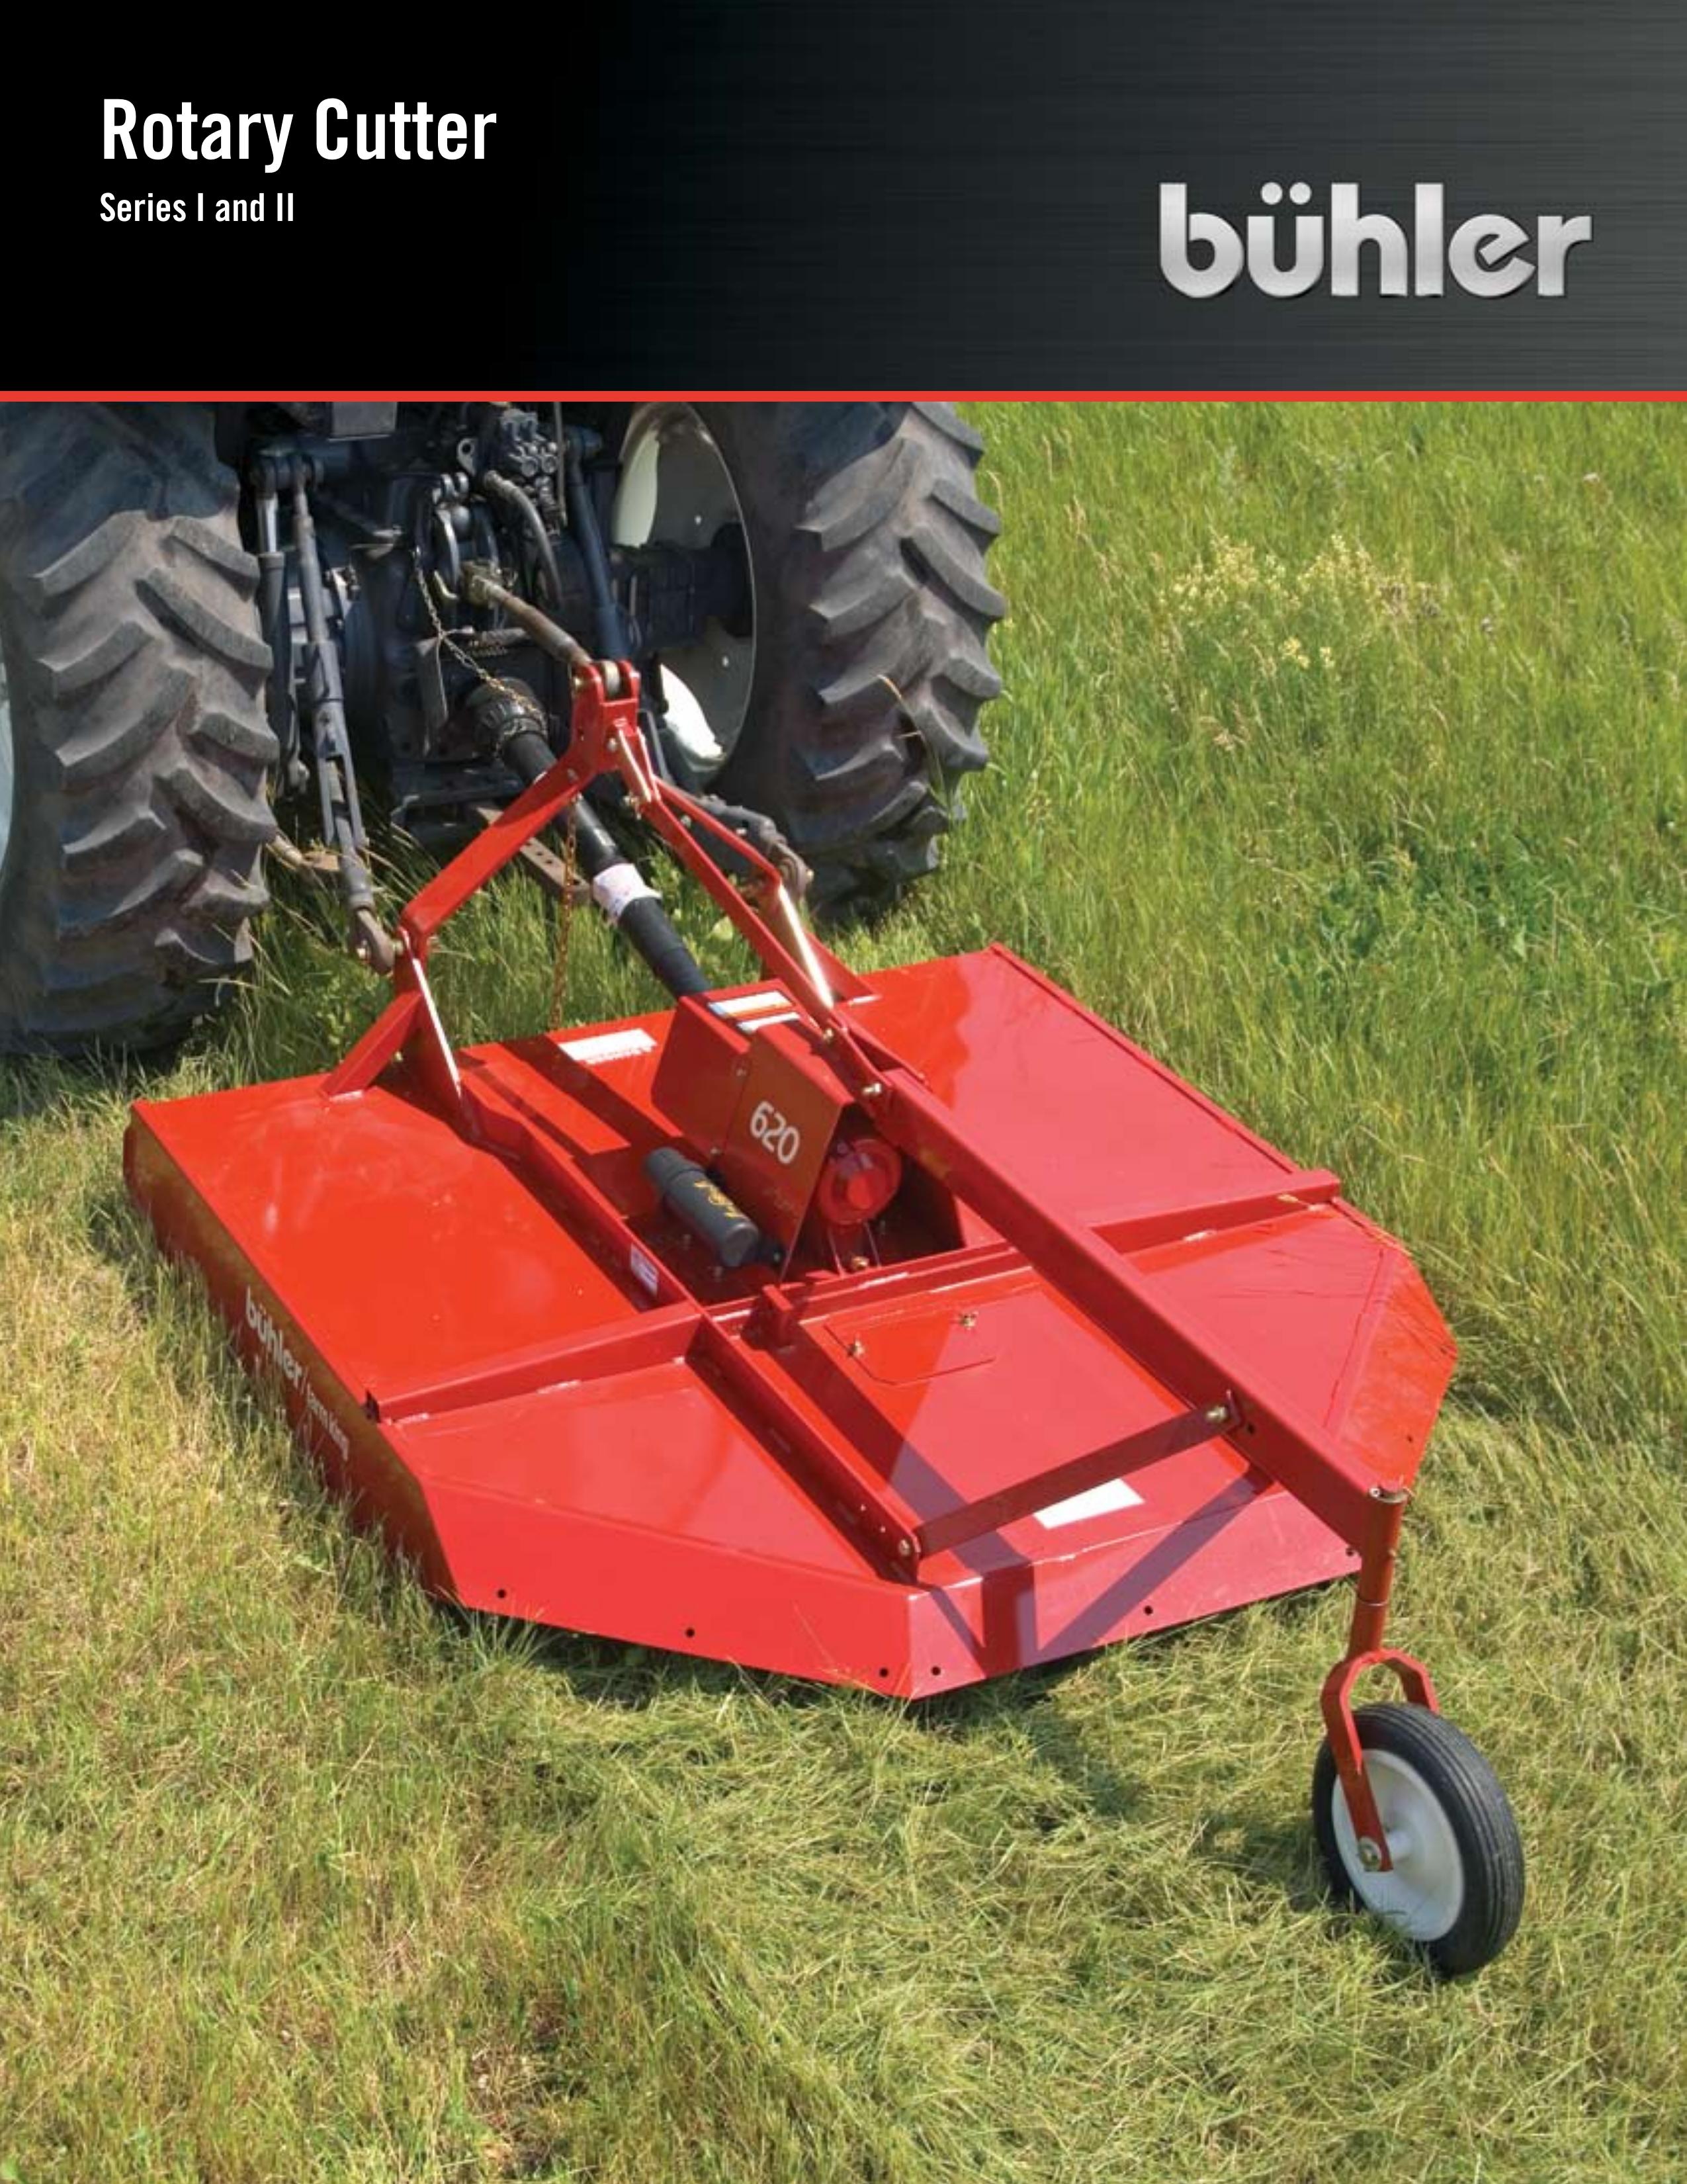 Buhler Y510lS Brush Cutter User Manual (Page 1)